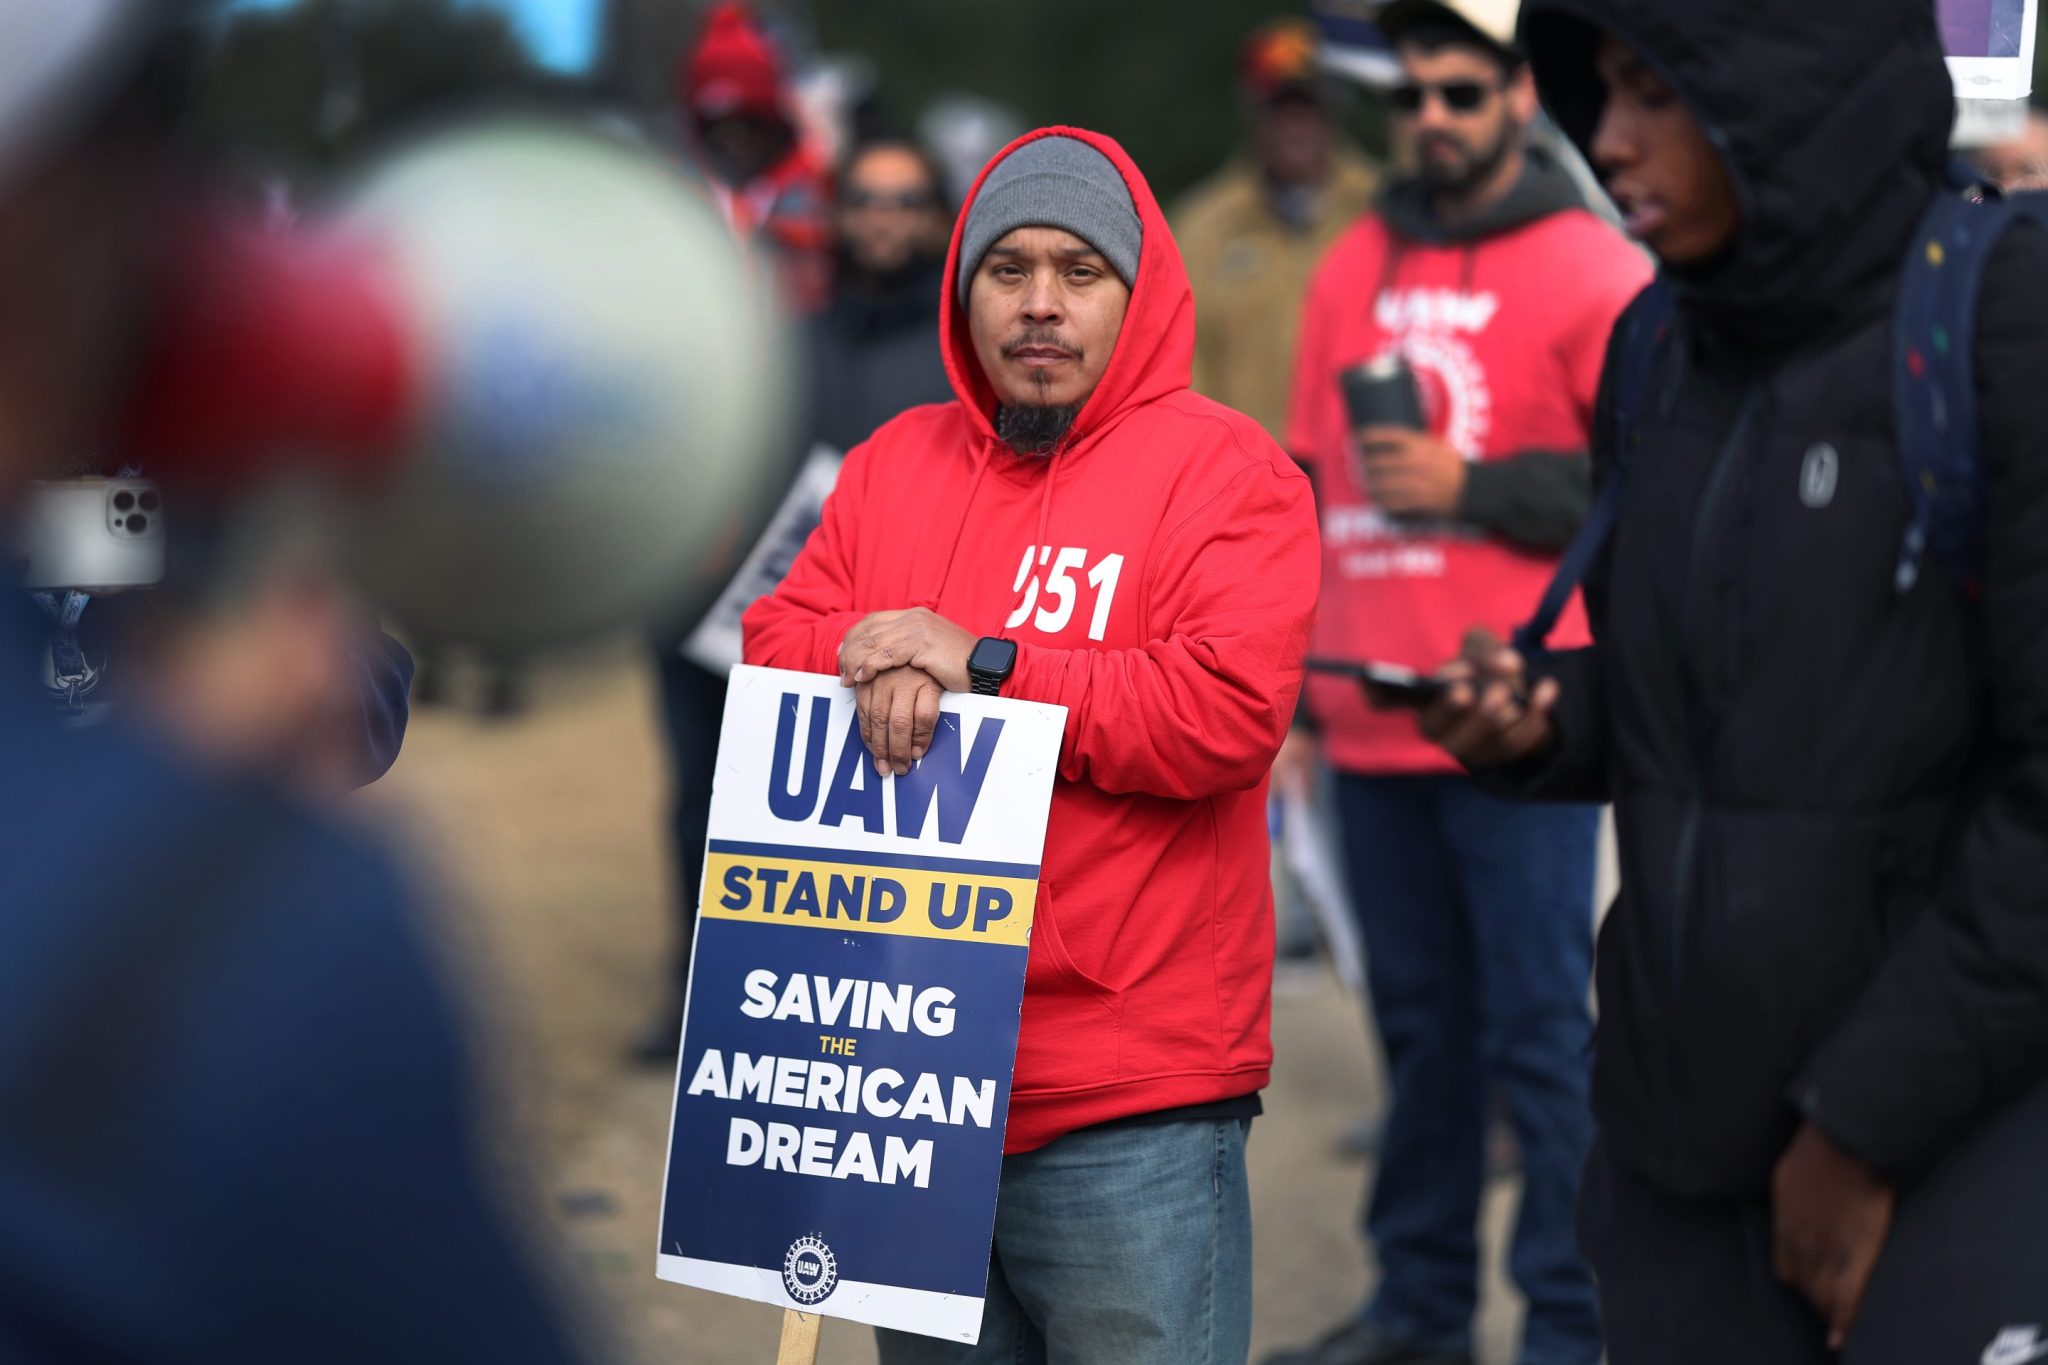 UAW workers at GM appear close to rejecting ‘historic’ contract